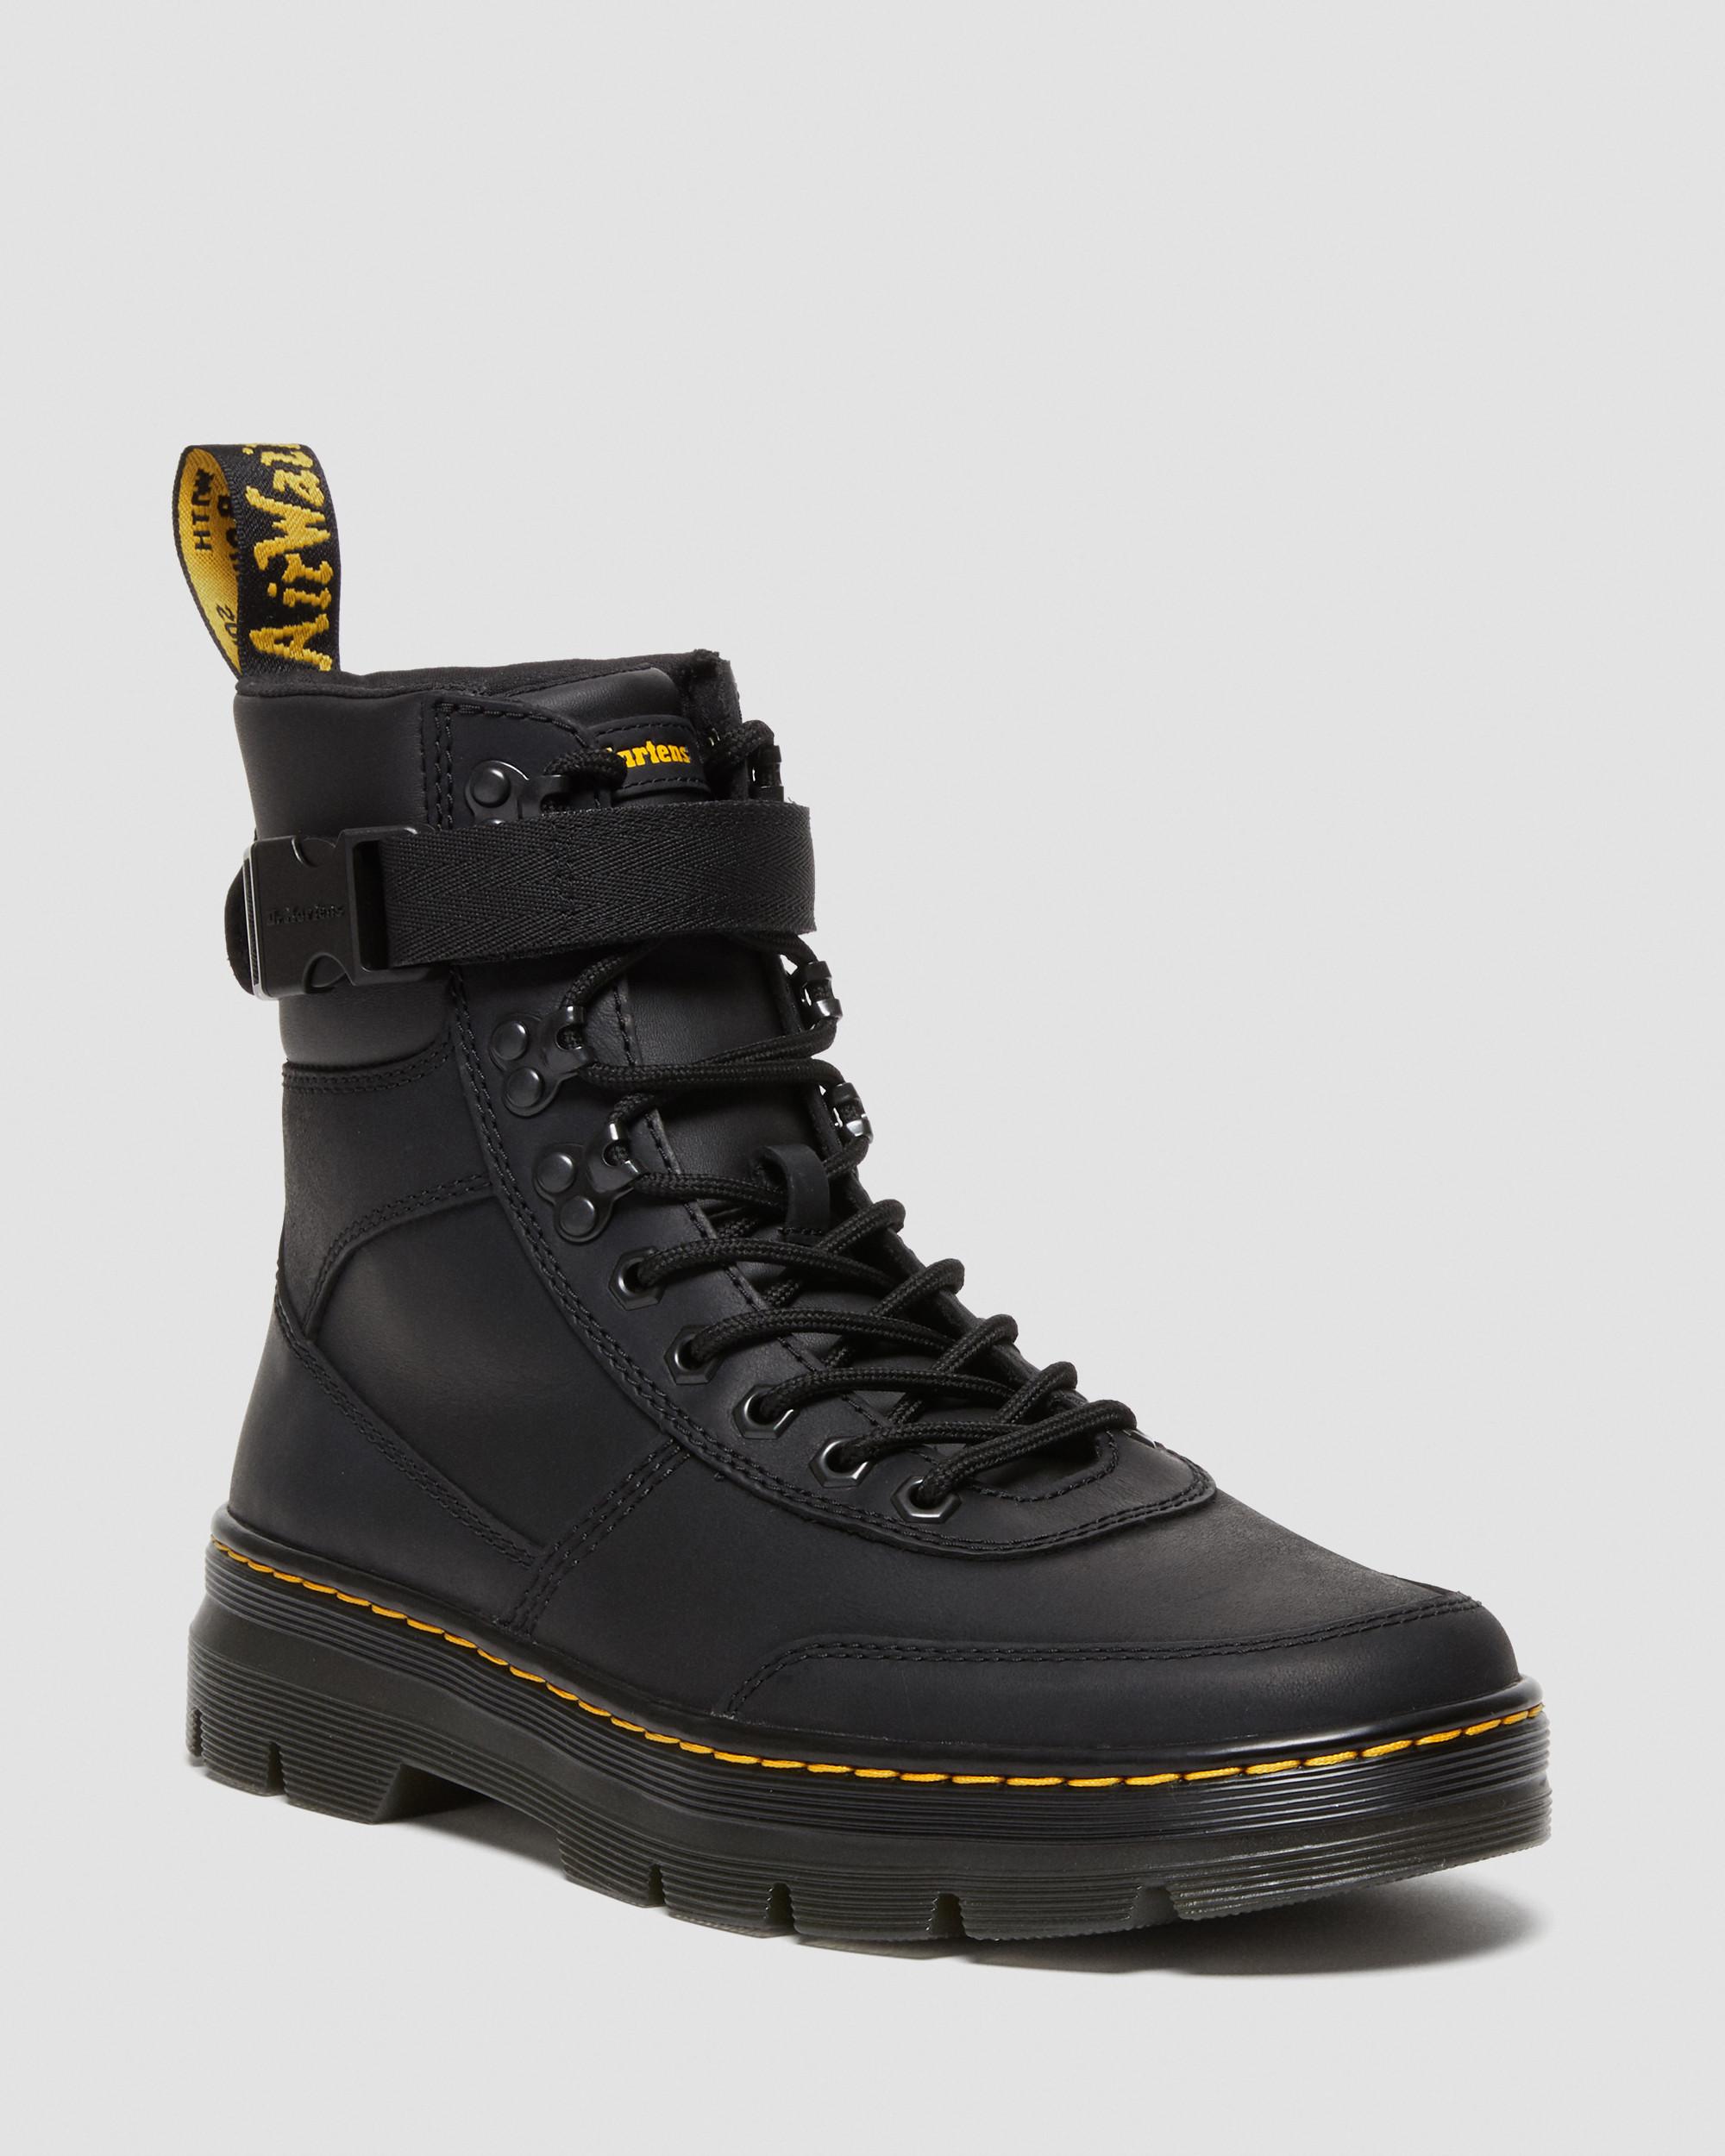 Combs Tech Wyoming in Black Boots Martens Leather Casual | Dr